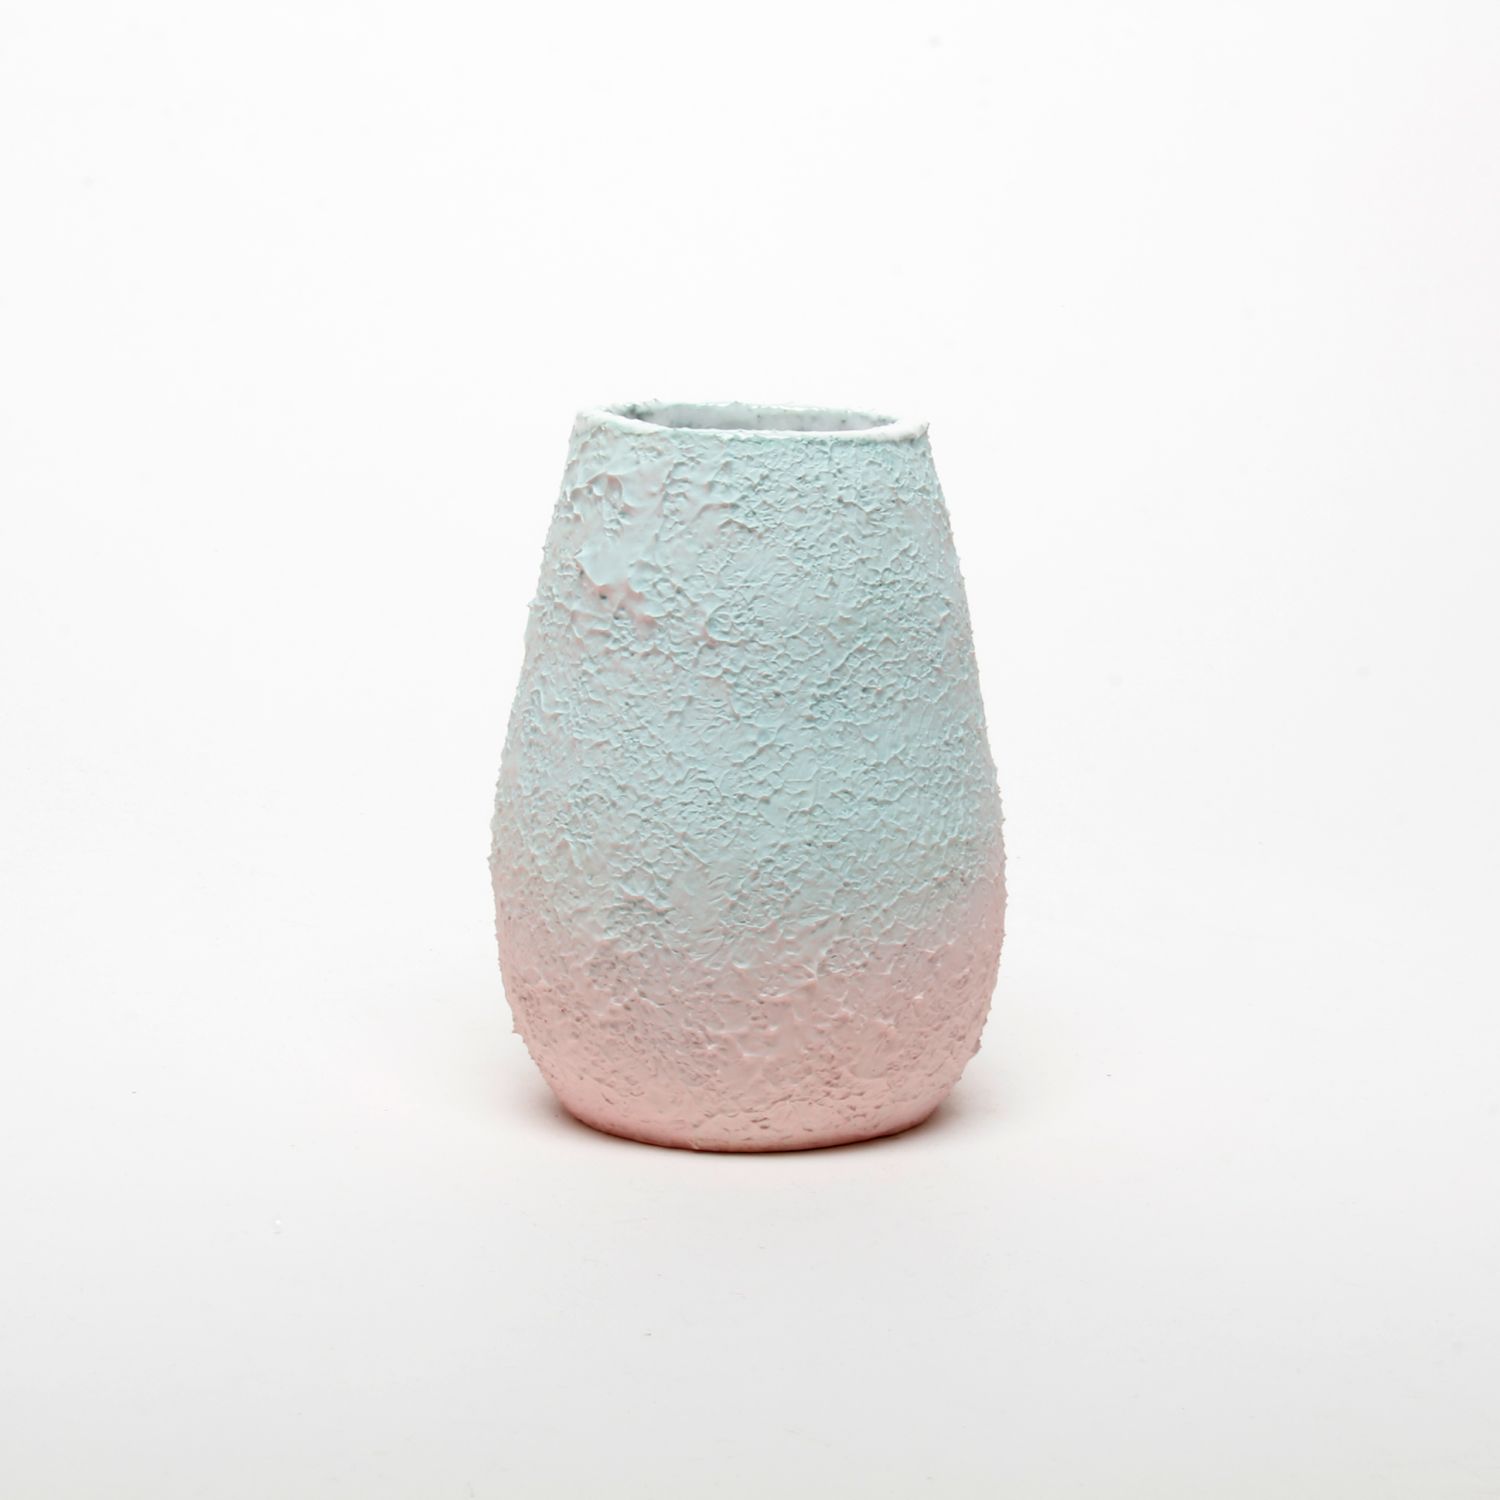 Hannah Faas: Large Gradient Vase Product Image 2 of 2